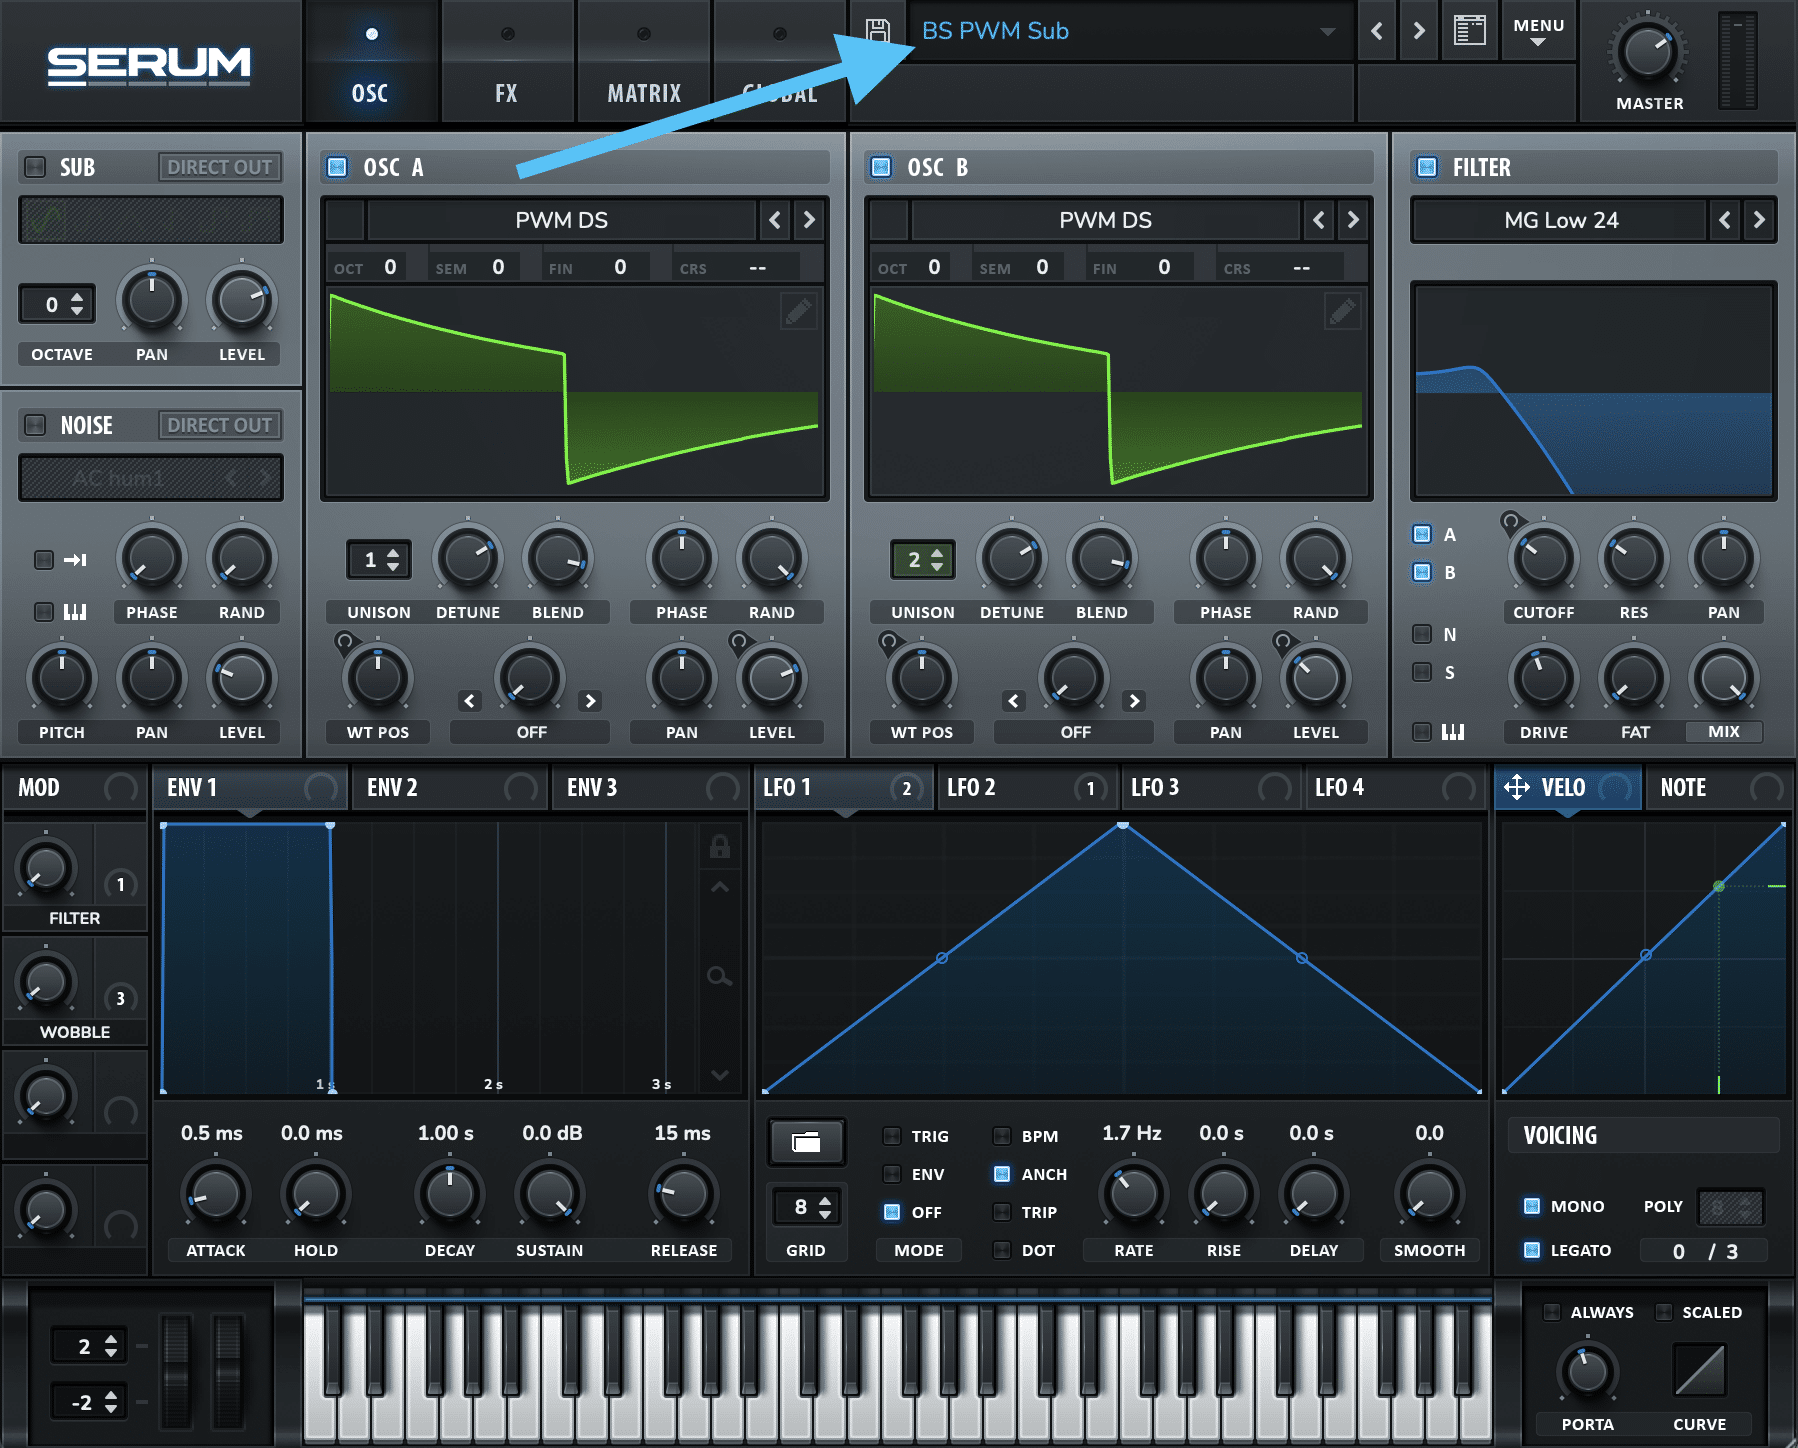 Loading up a preset in Serum for liquid drum and bass